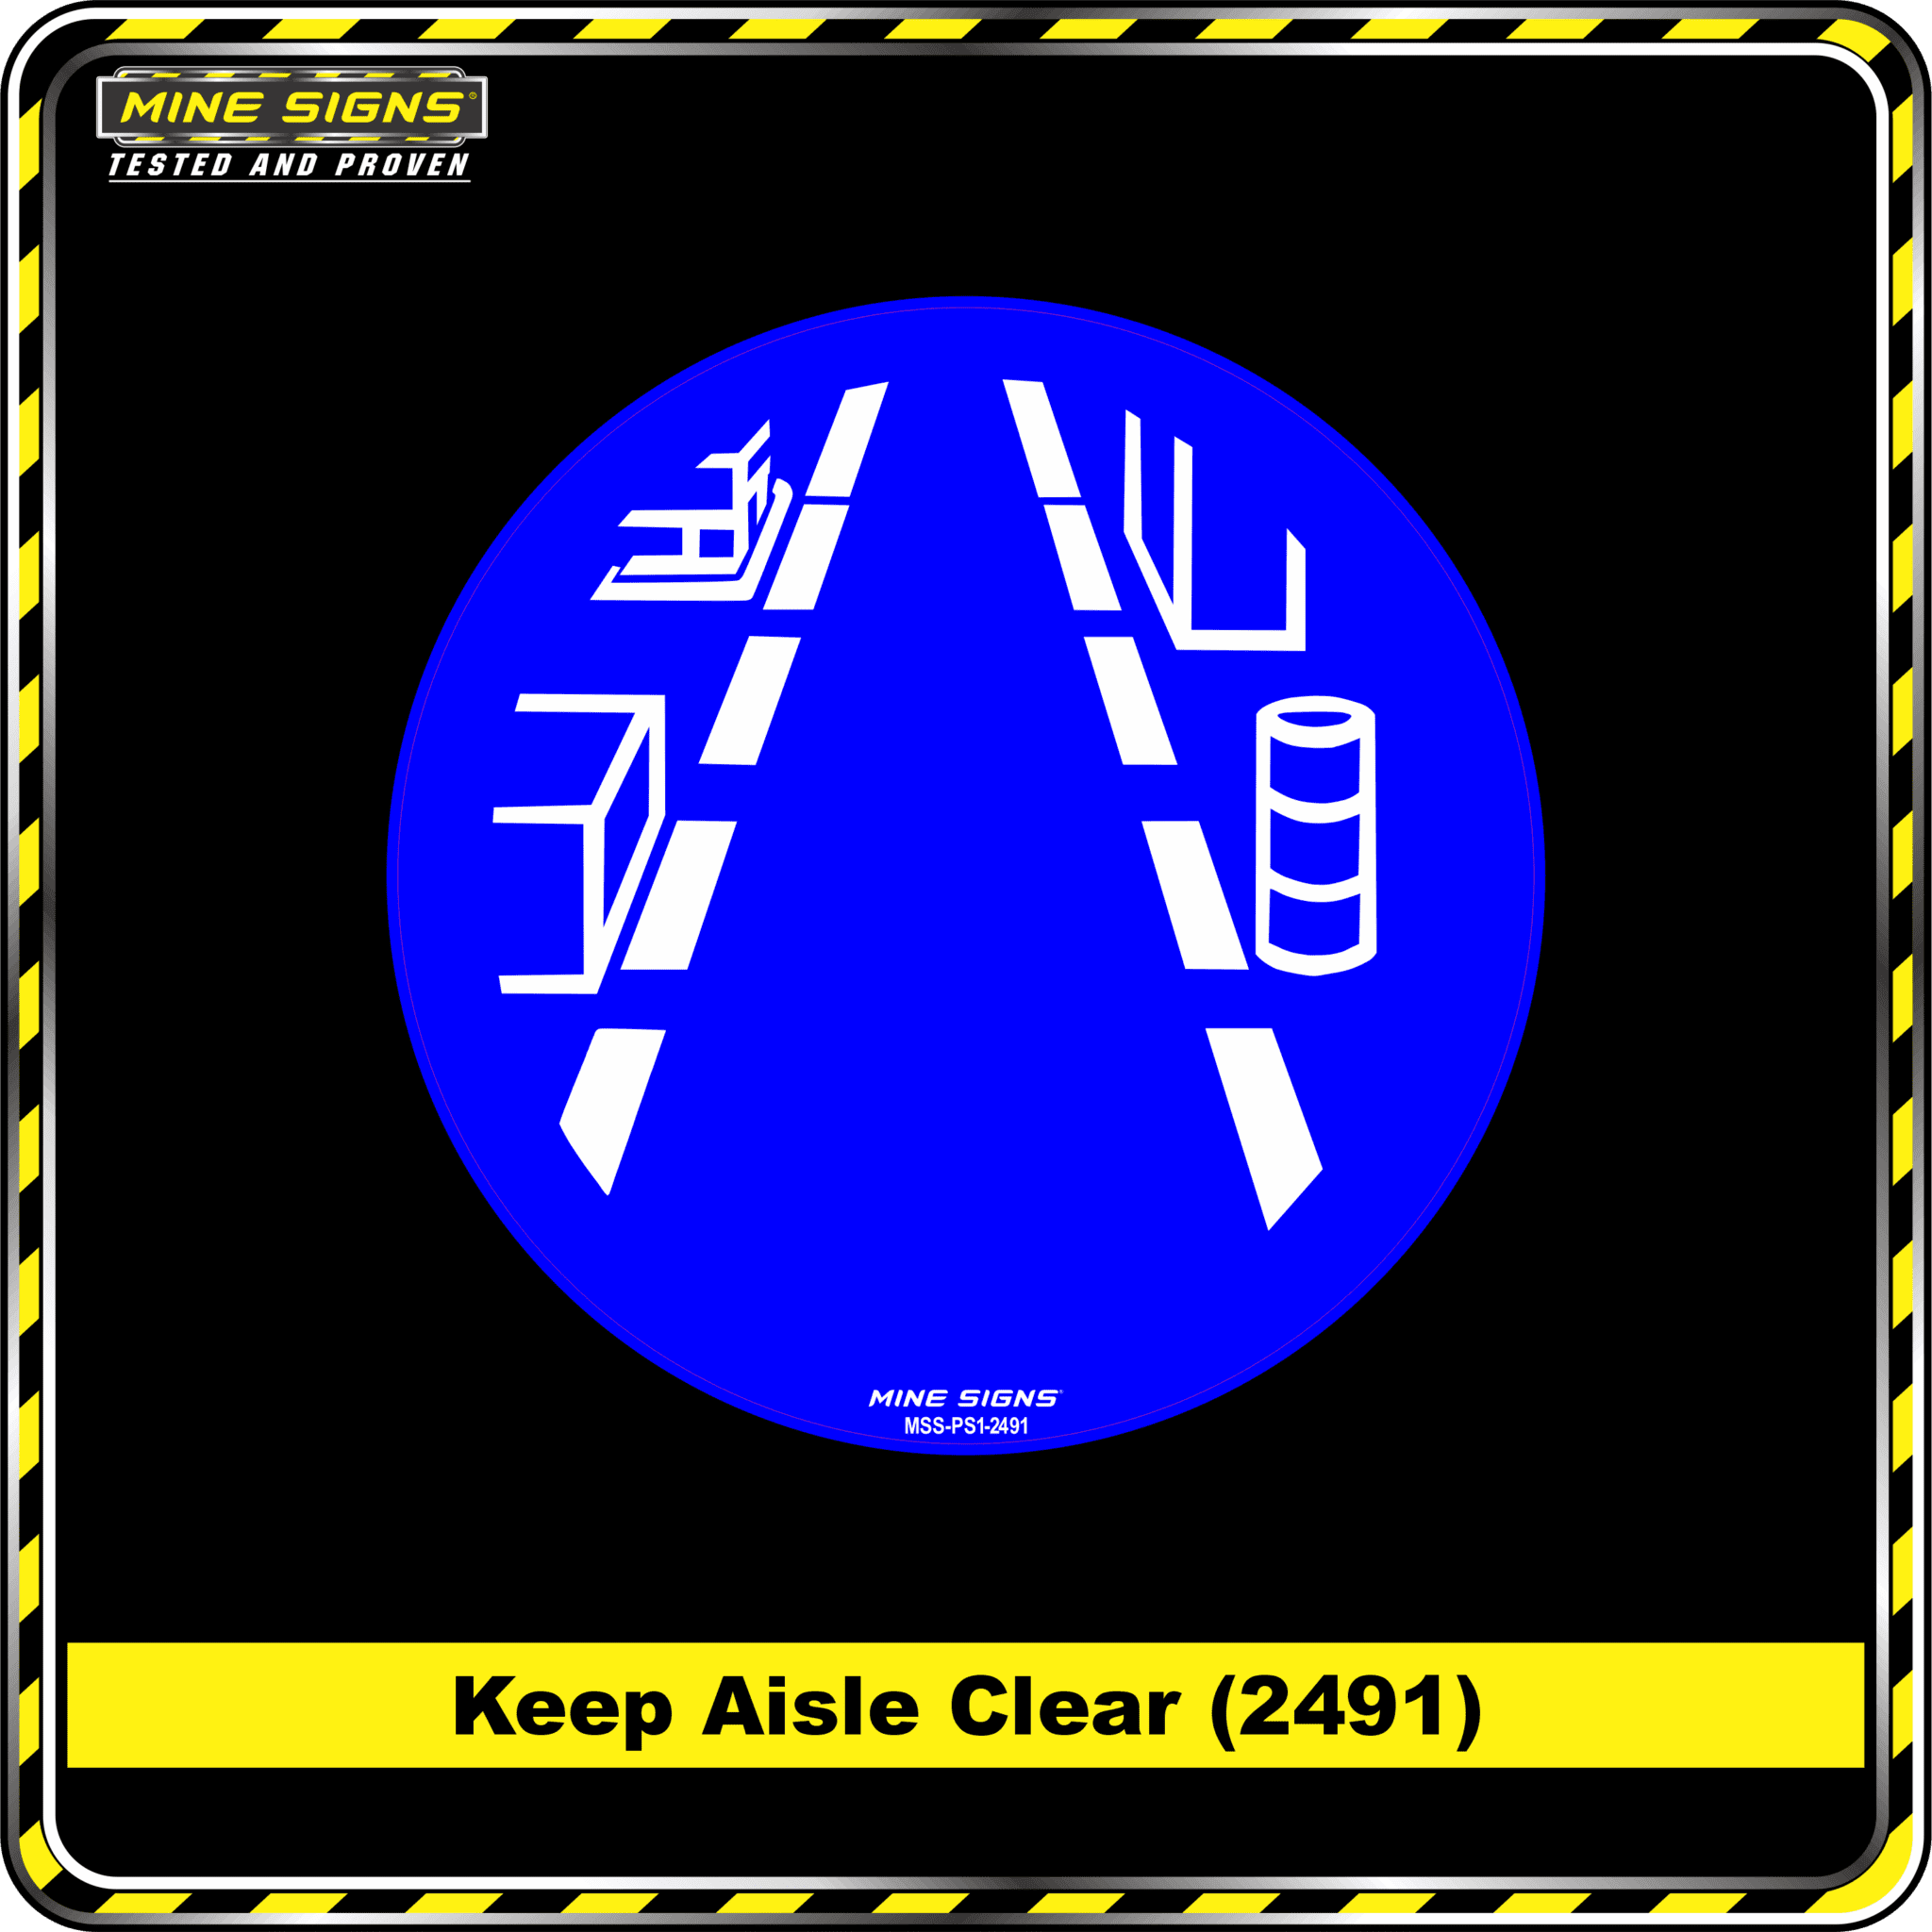 MS - Product Background - Safety Signs - Keep Isle Clear 2491